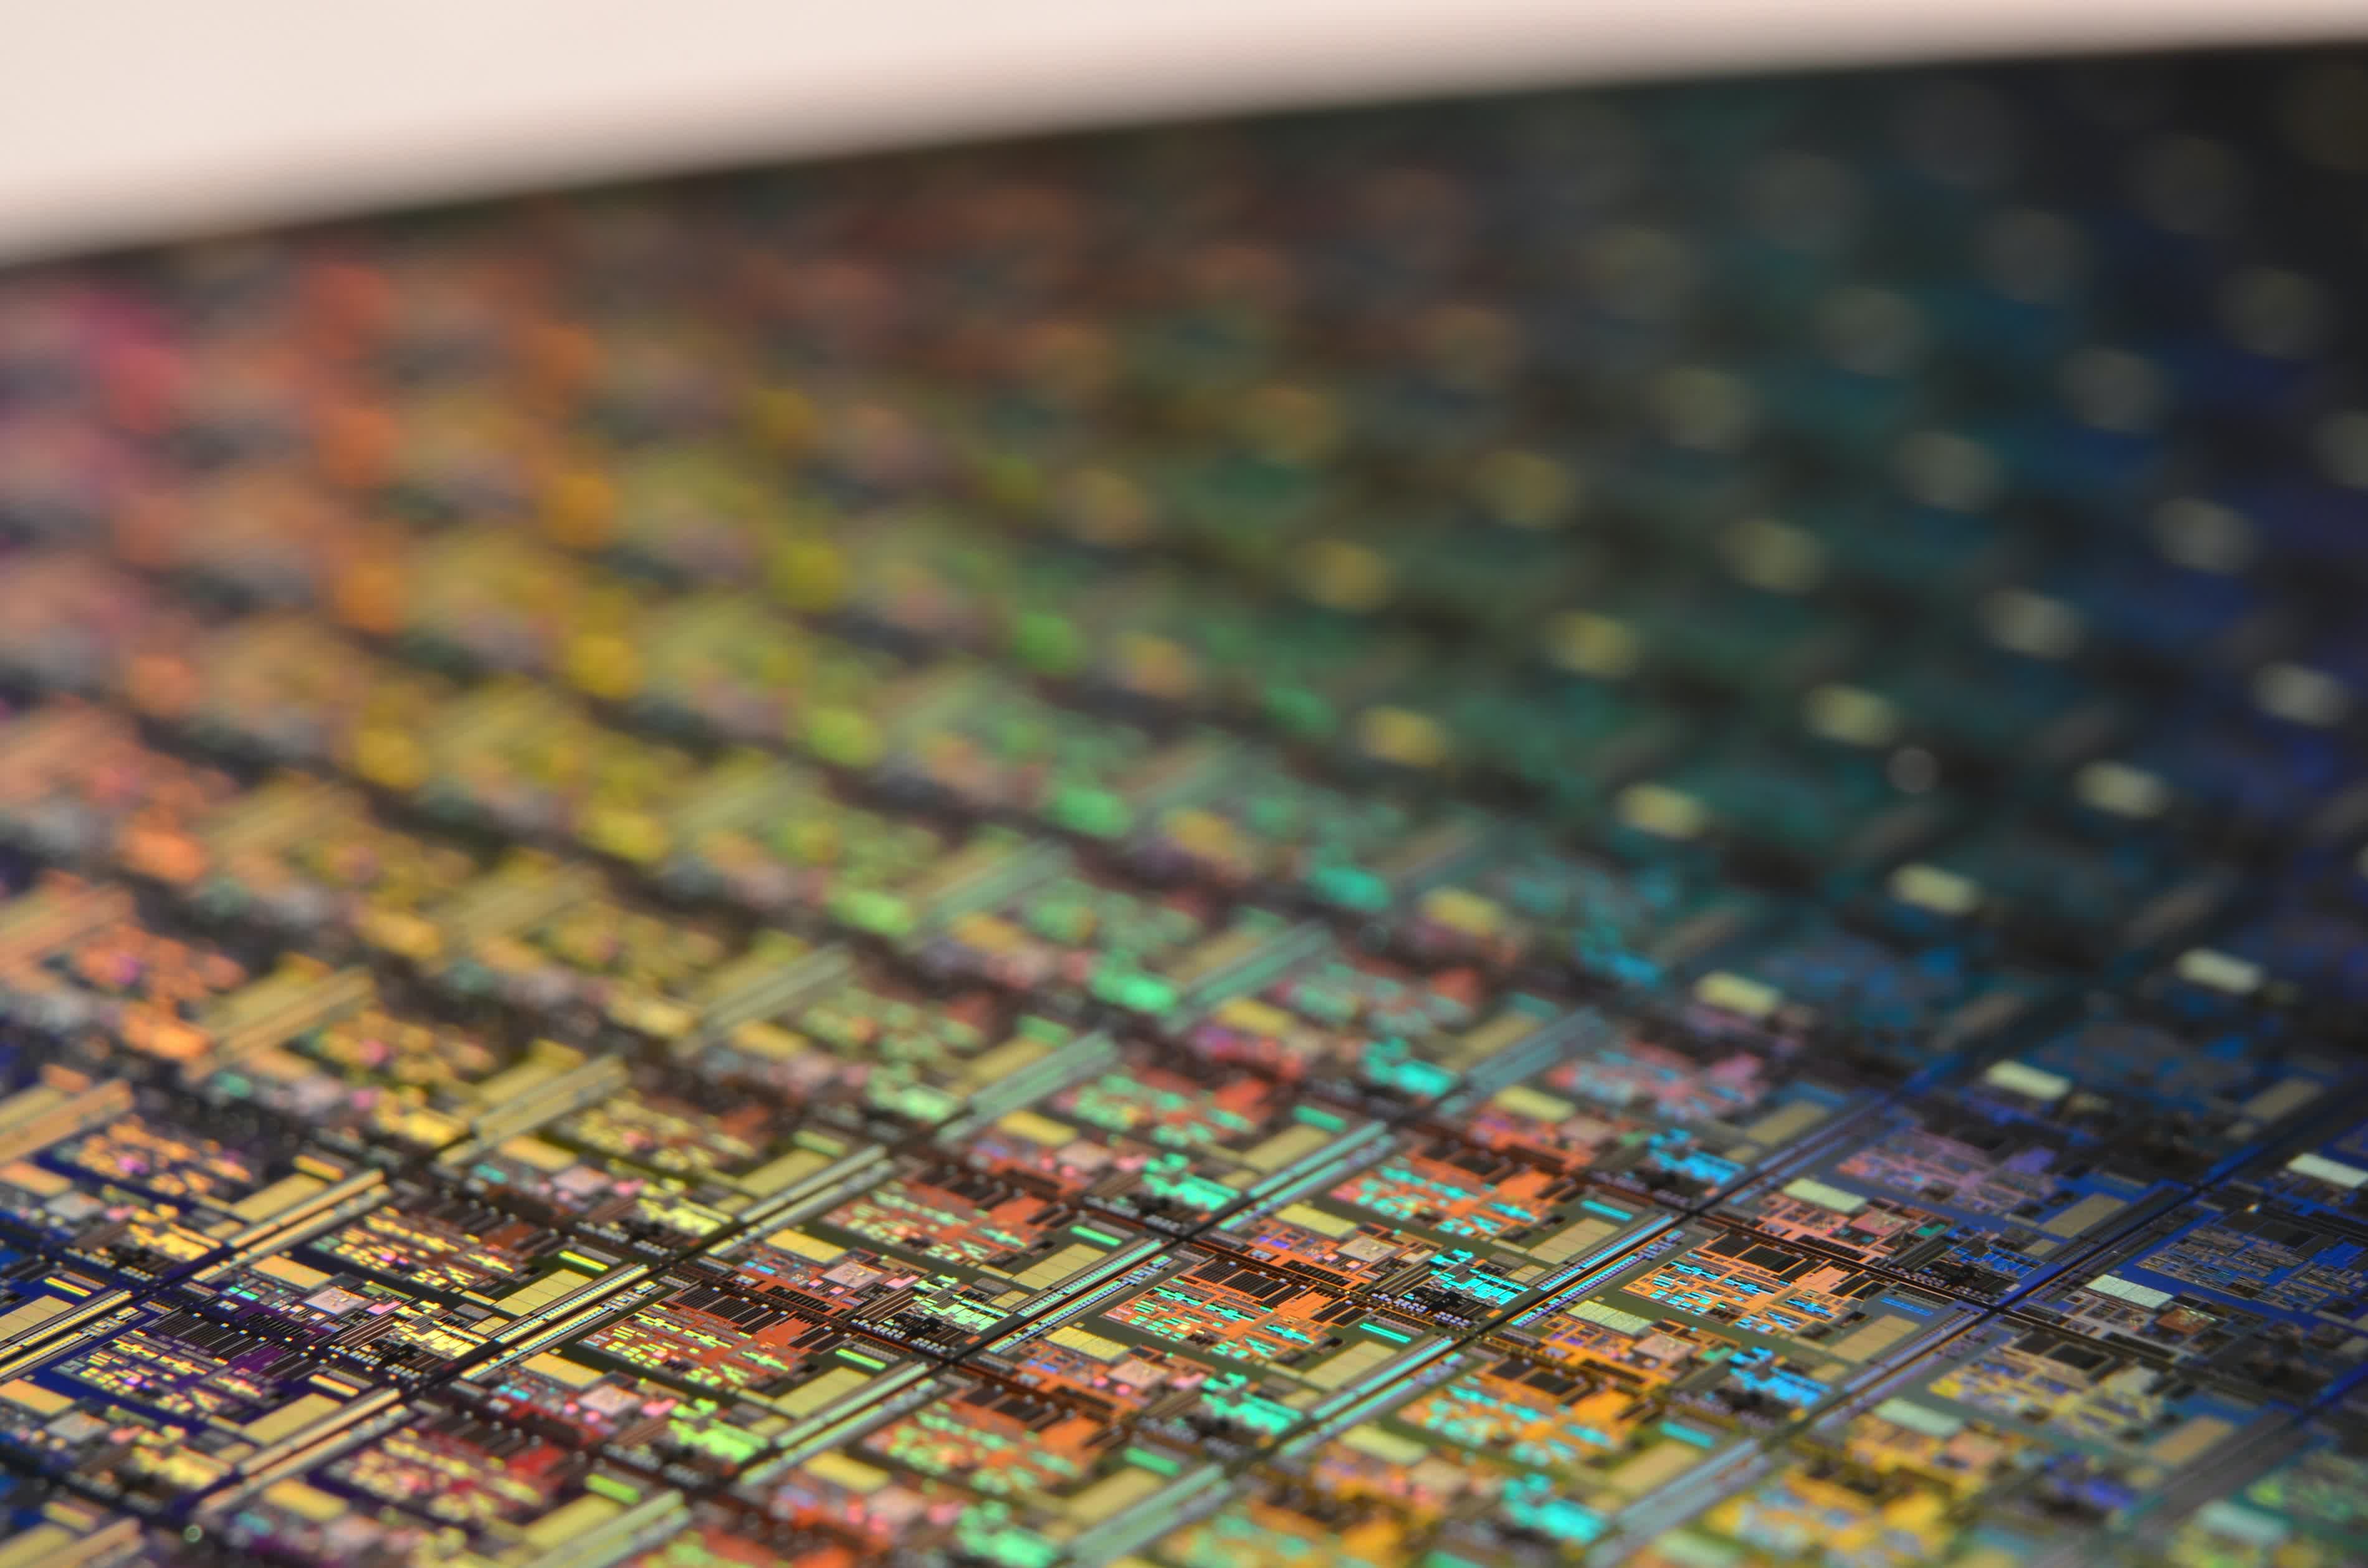 Samsung could begin mass production of 3nm chips as soon as this week